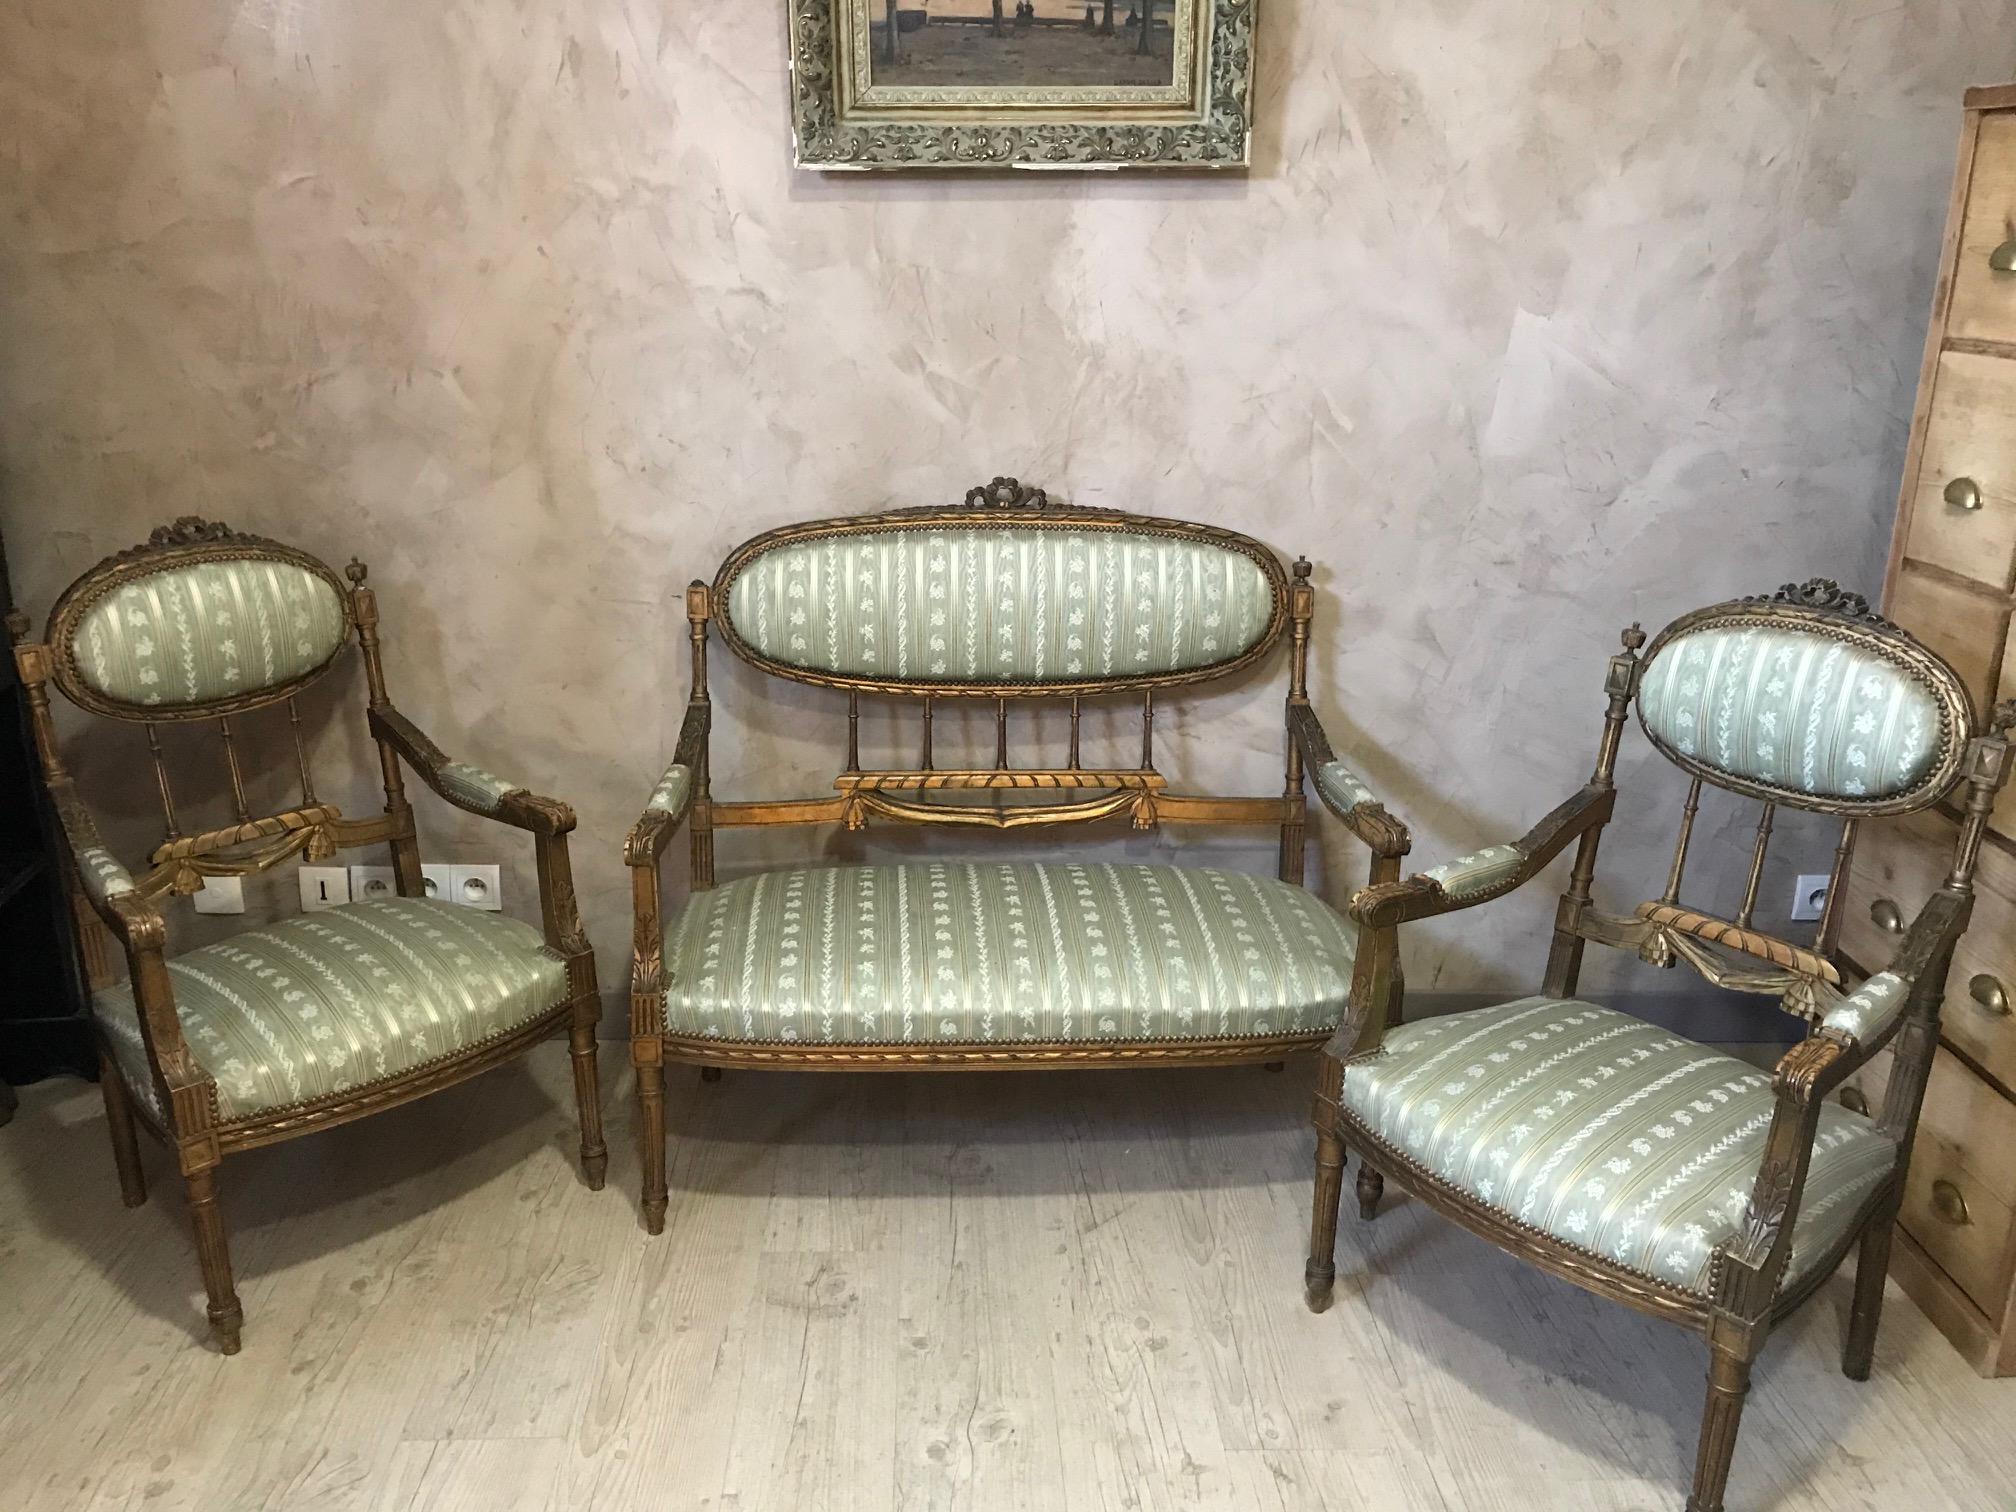 Very nice 20th century French Louis XVI style golden wood and green silk Salon from the 1920s.
A sofa, two armchairs and two chairs.
Good main condition but some flaws:
- Missing glans on the sofa and one on an armchair
- An armchair foot has